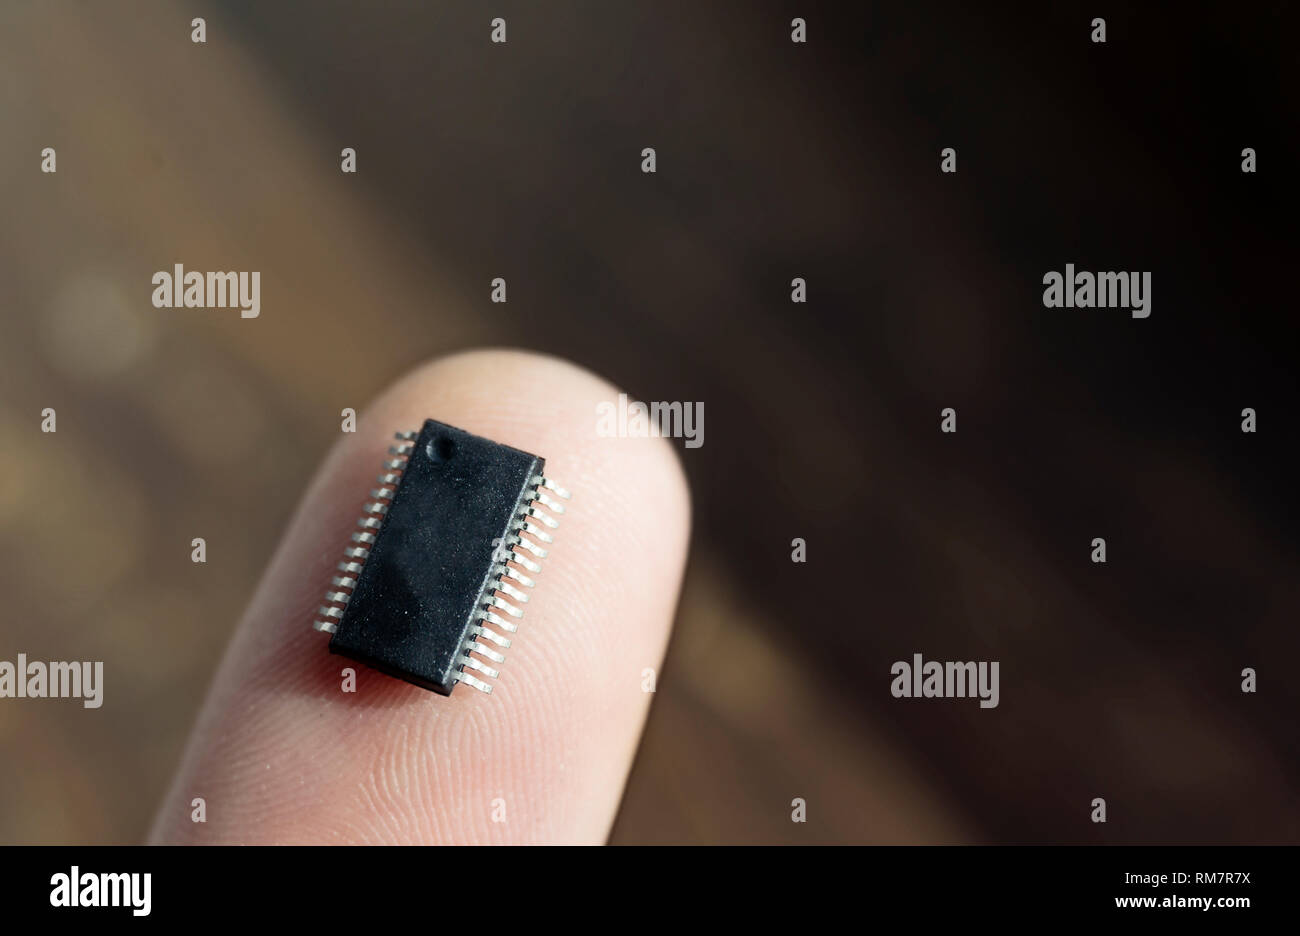 Microchip on a finger, microchip pins match the lines of the fingerprint, concept, bio-integrated electronics, sensor systems, future living Stock Photo